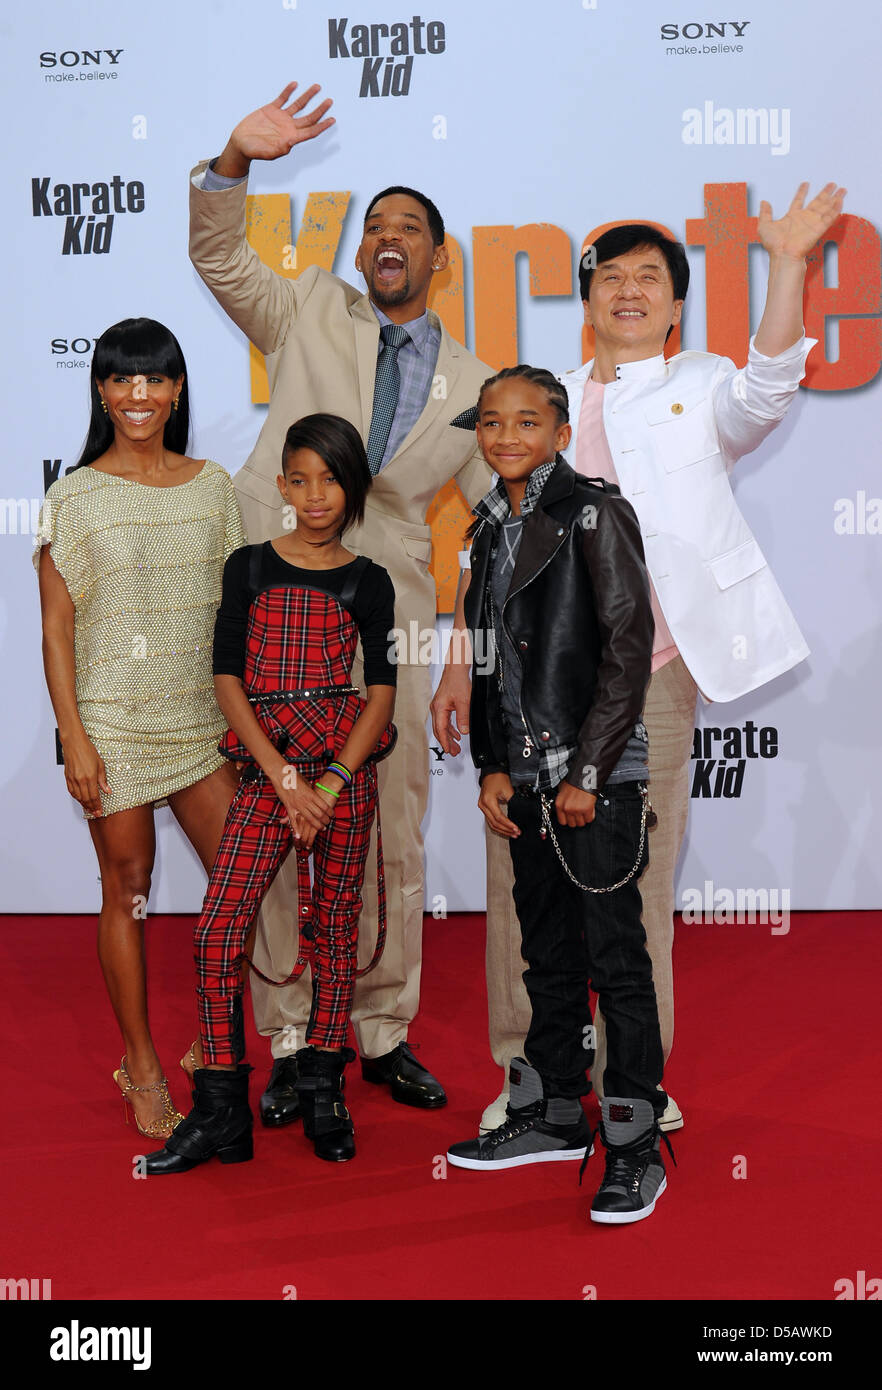 American actor Will Smith (back), his wife Jada Pinkett (front L-R), his daughter Willow, son Jaden and Hong Kong-born actor Jackie Chan pose at the premier of 'Karate Kid' in Berlin, Germany, 19 July 2010. The film will be shown in German cinemas starting 22 July 2010. Photo: Jens Kalaene Stock Photo